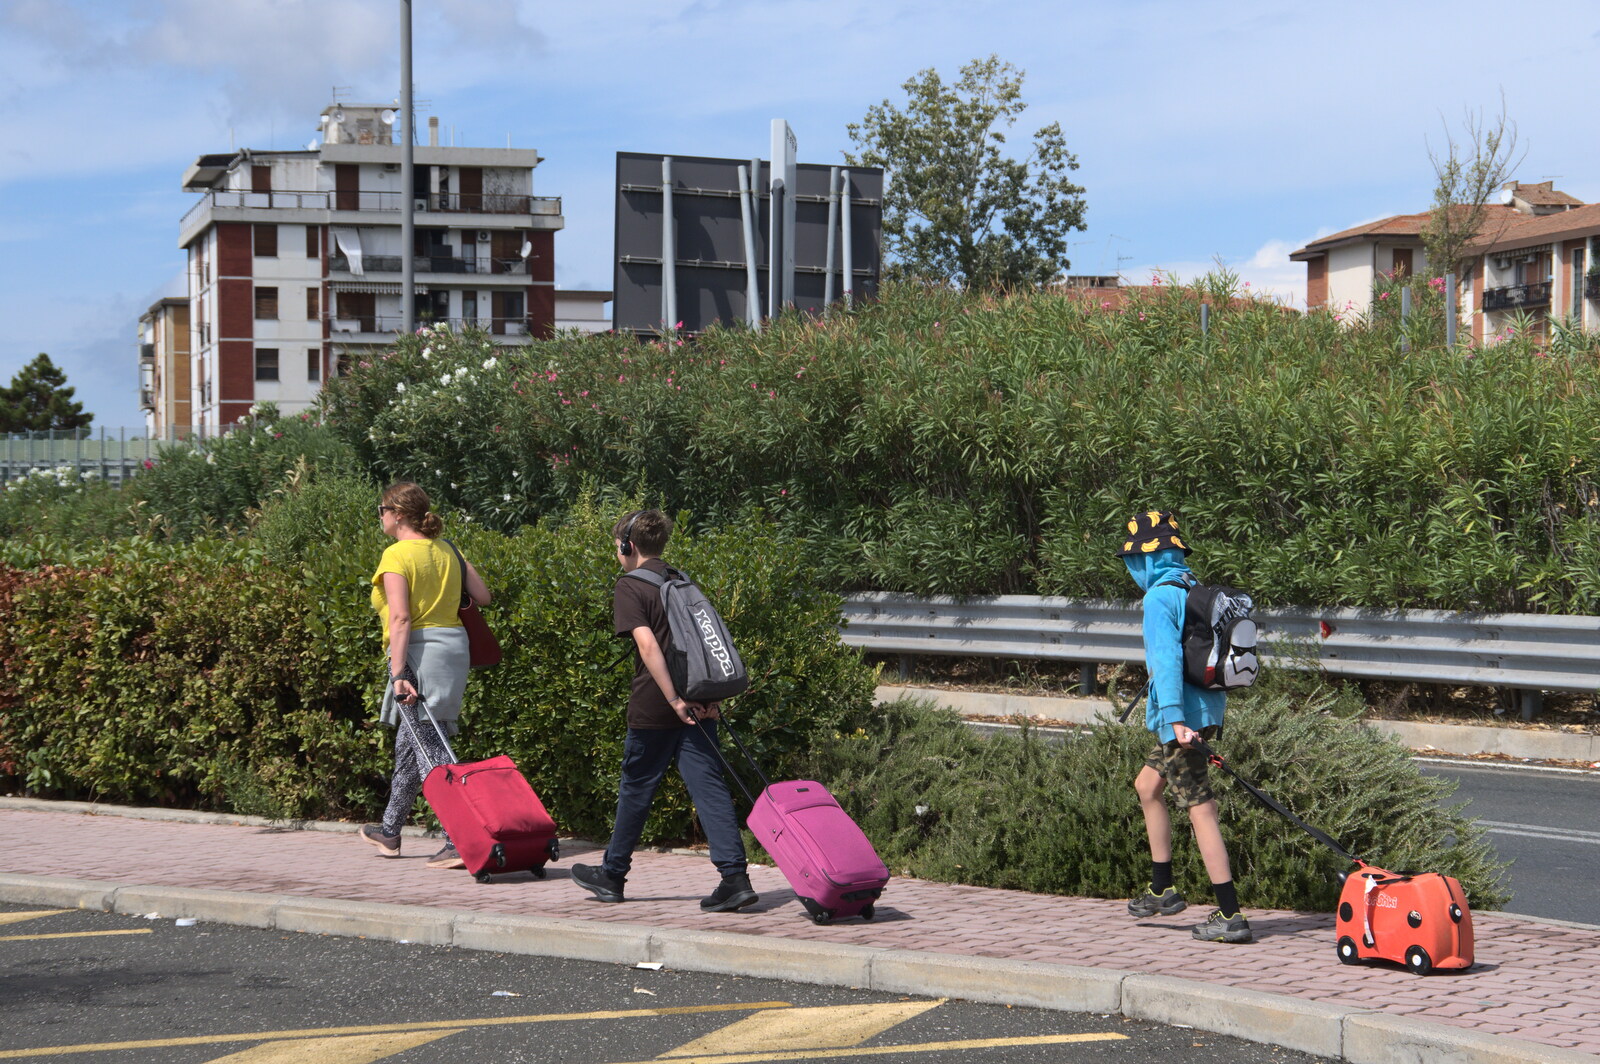 A Day by the Pool and a Festival Rehearsal, Arezzo, Italy - 3rd September 2022: We haul our luggage over to the terminal